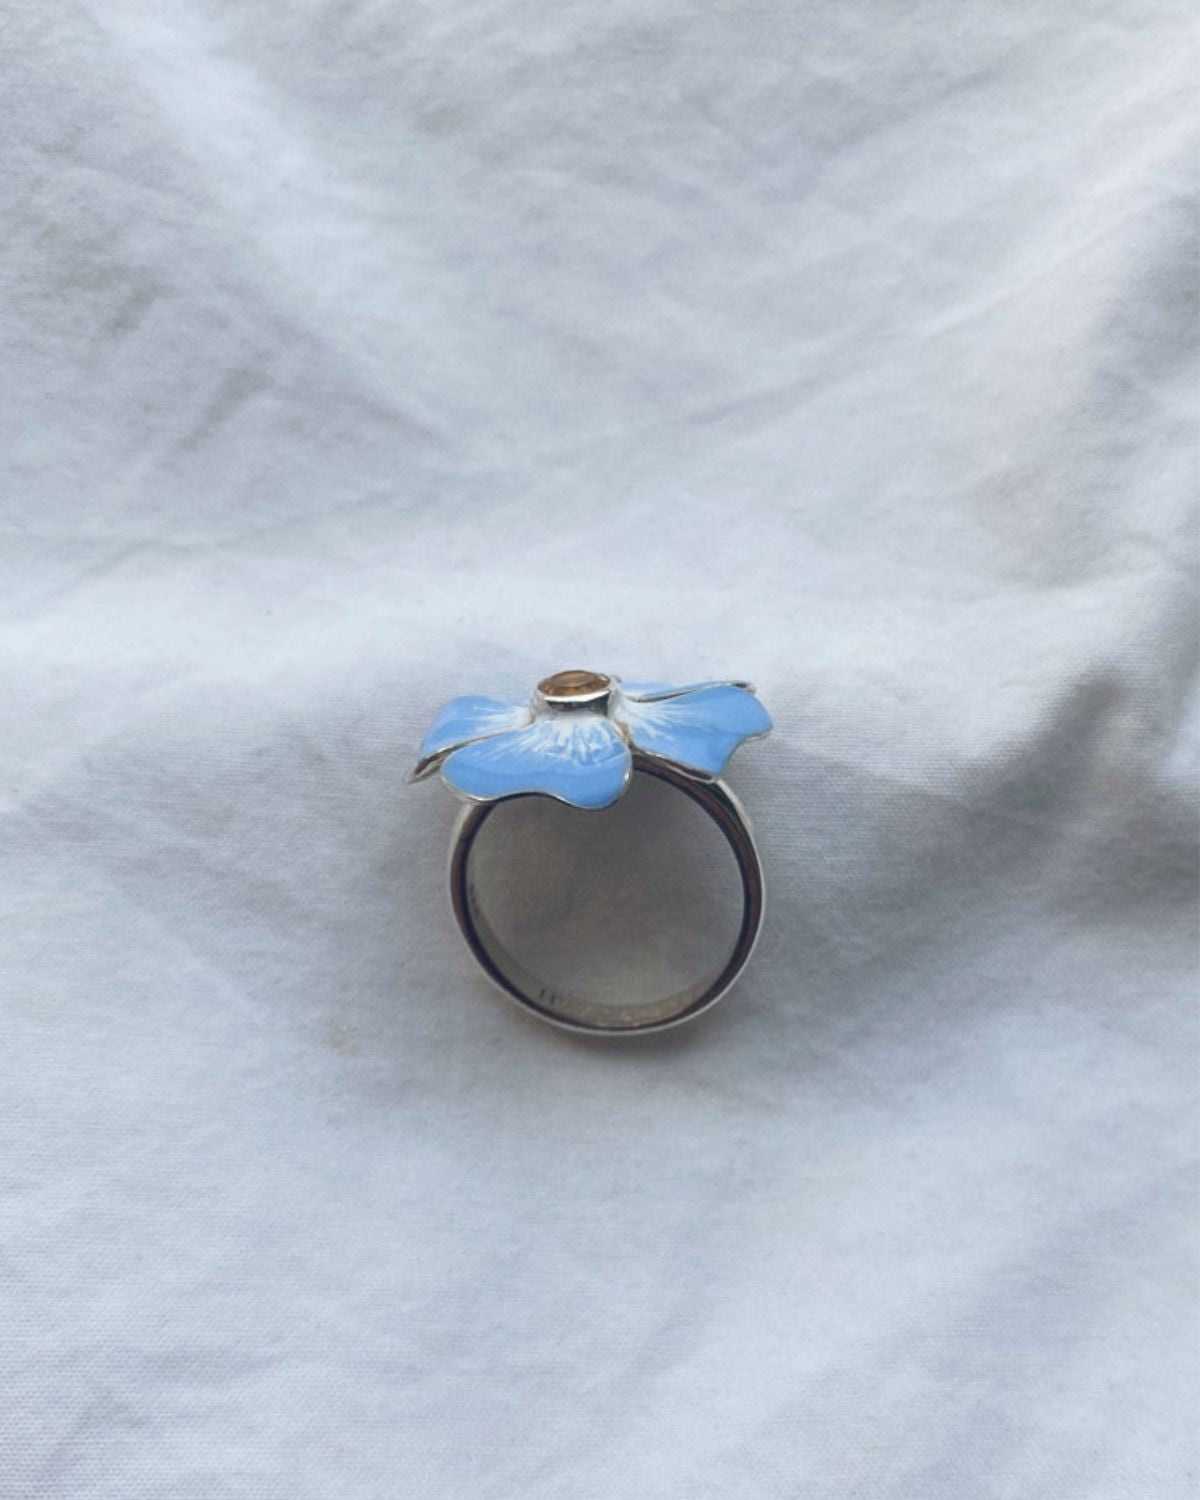 Forget-me-not ring sterling silver